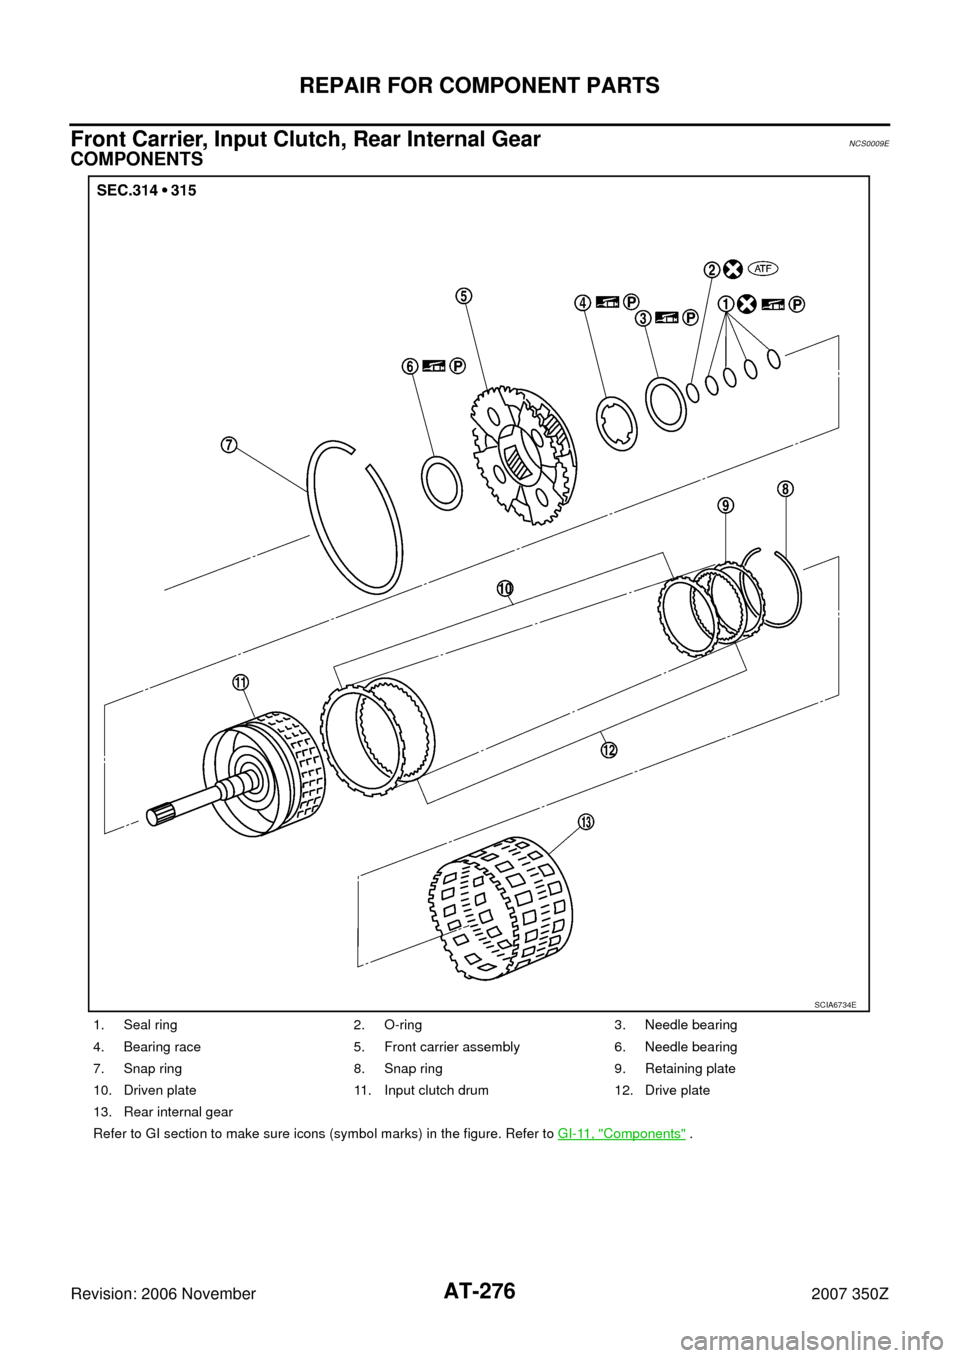 NISSAN 350Z 2007 Z33 Automatic Transmission Workshop Manual AT-276
REPAIR FOR COMPONENT PARTS
Revision: 2006 November2007 350Z
Front Carrier, Input Clutch, Rear Internal GearNCS0009E
COMPONENTS
1. Seal ring 2. O-ring 3. Needle bearing
4. Bearing race 5. Front 